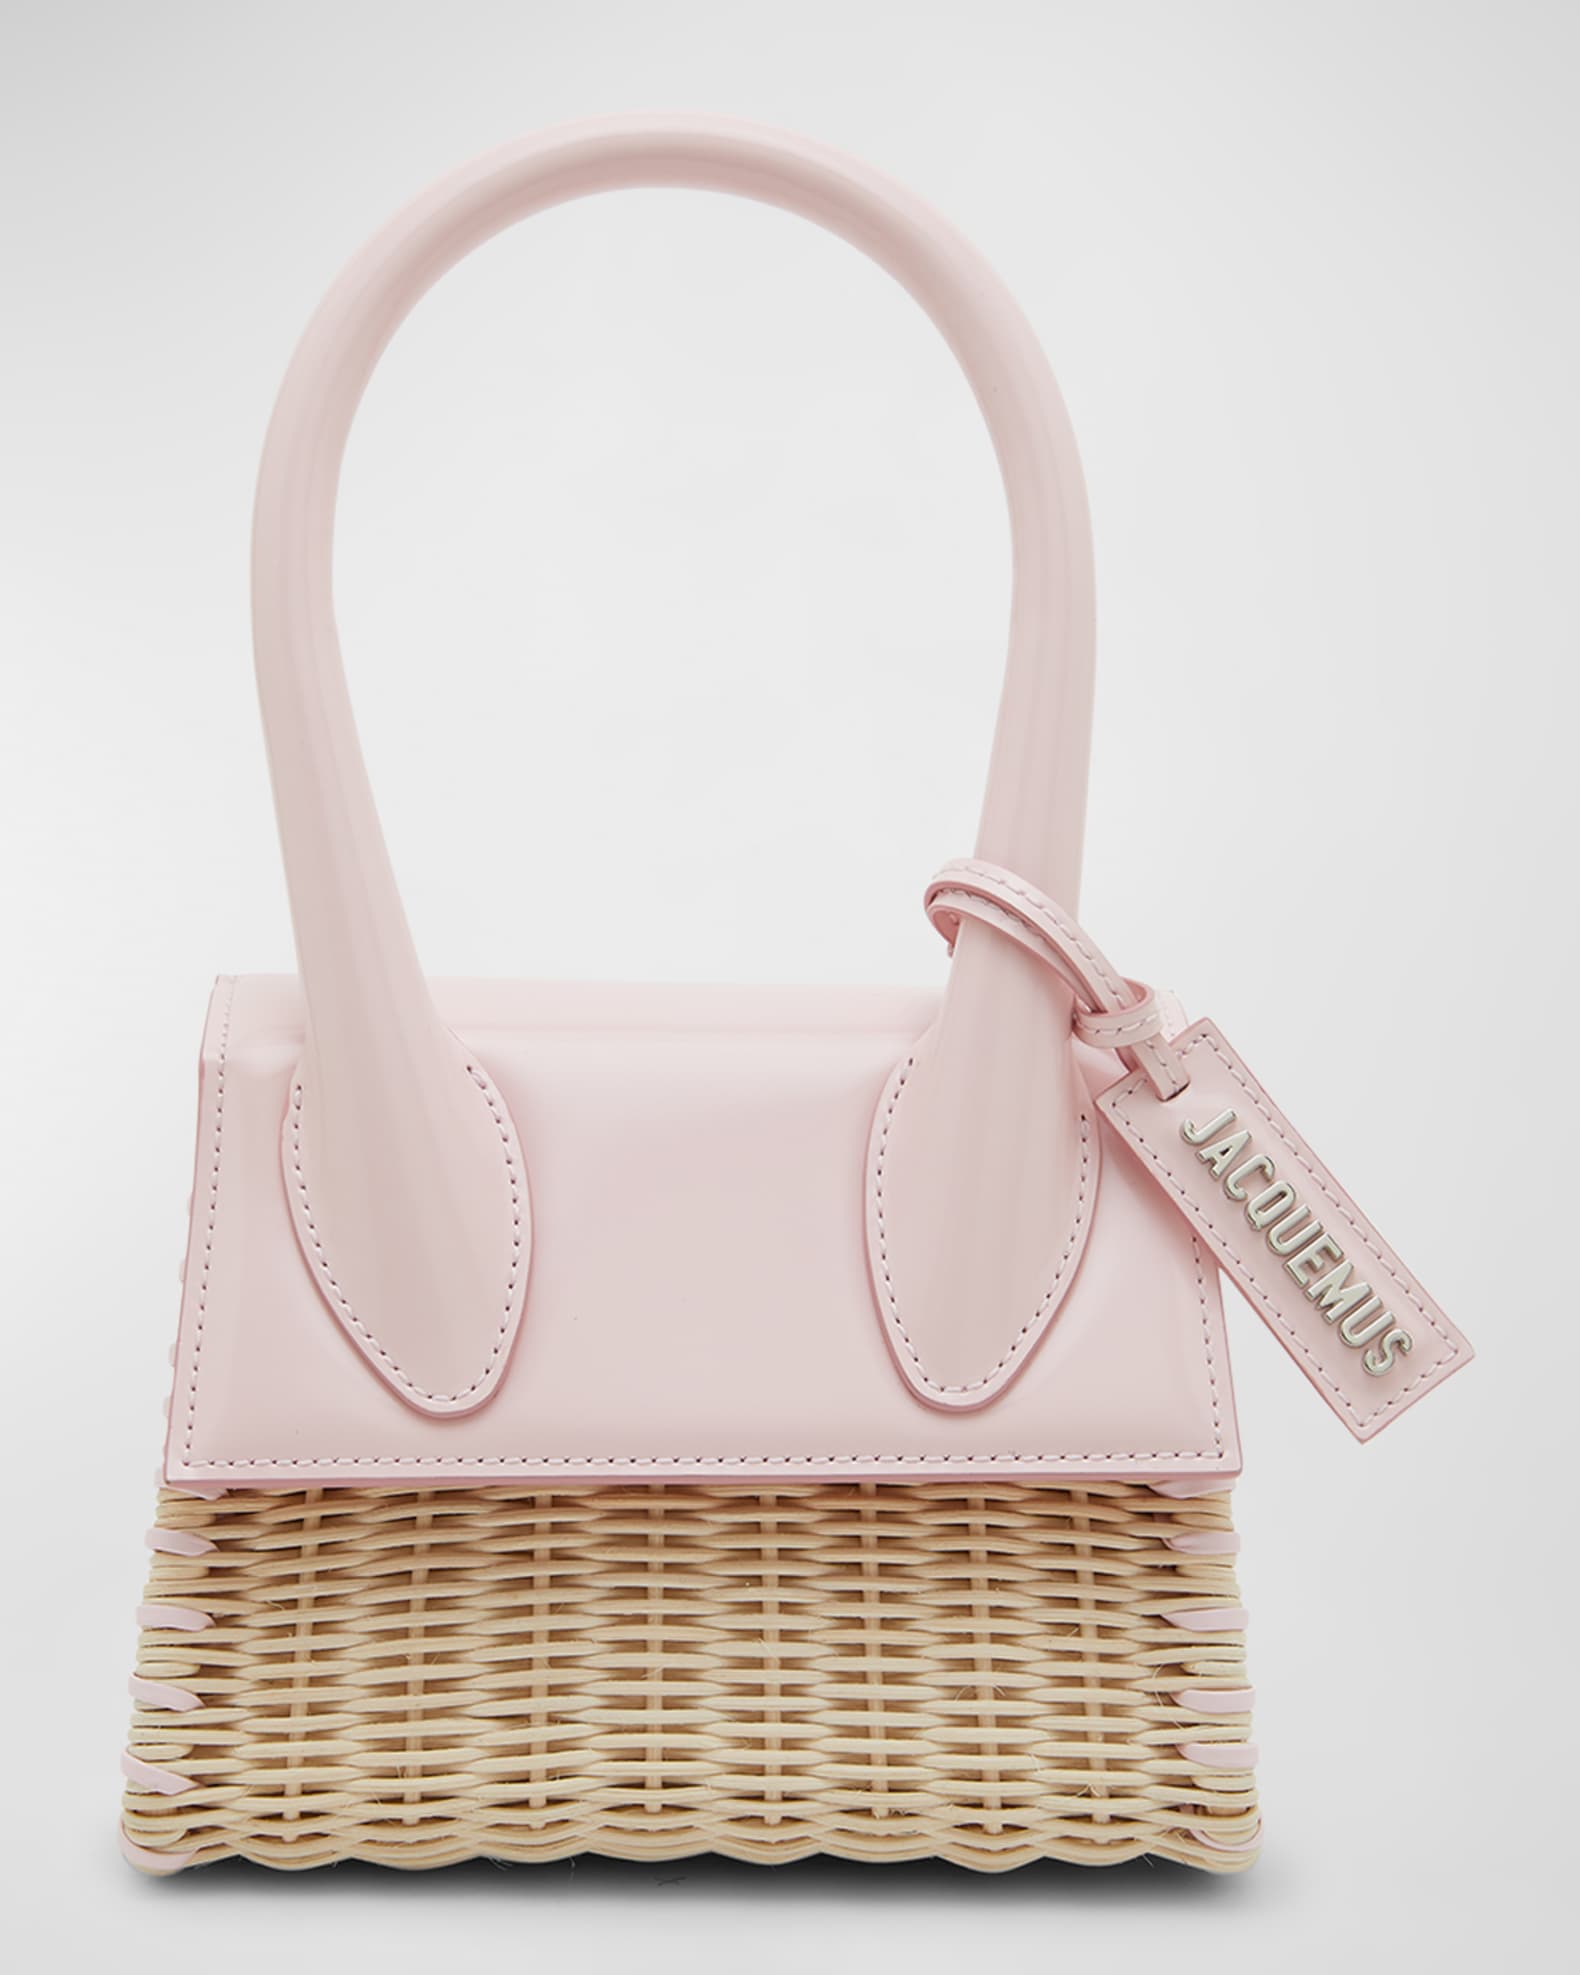 Jacquemus Le Chiquito Medium Leather Top-handle Bag in Pink